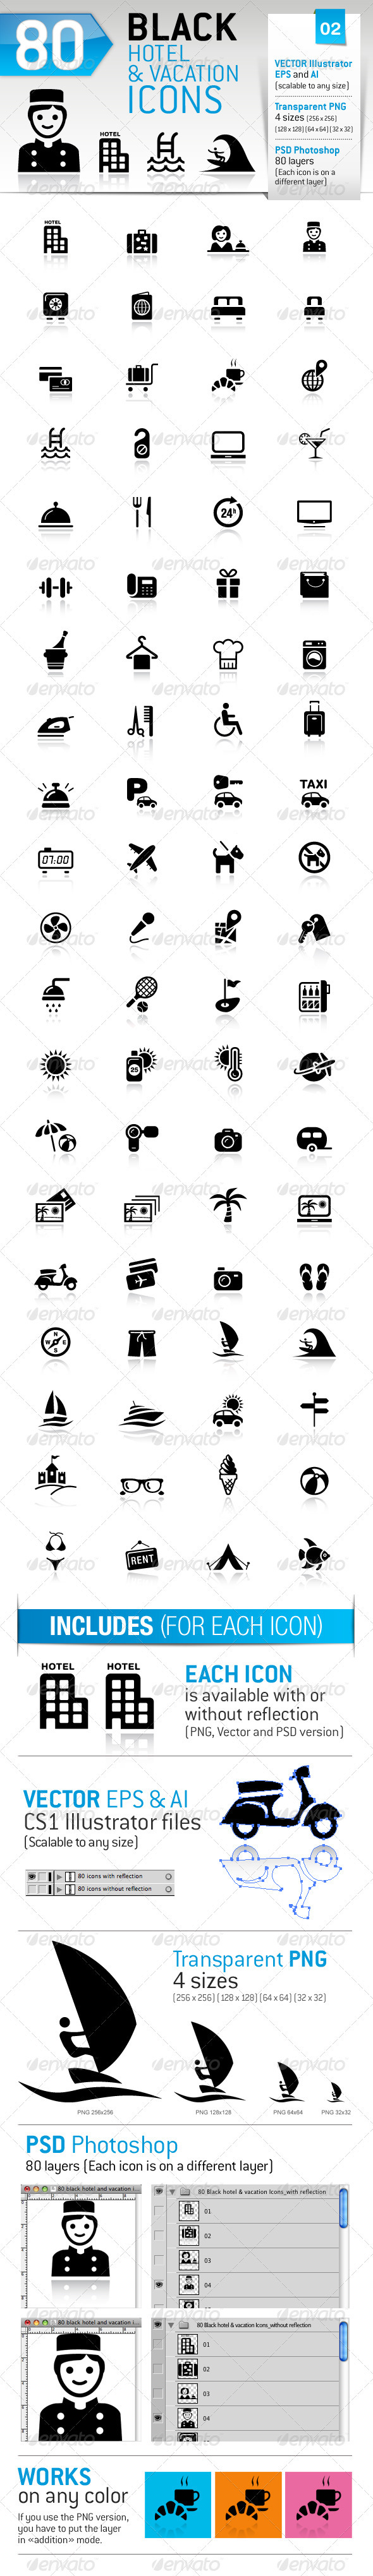 80 Black Hotel And Vacation Icons